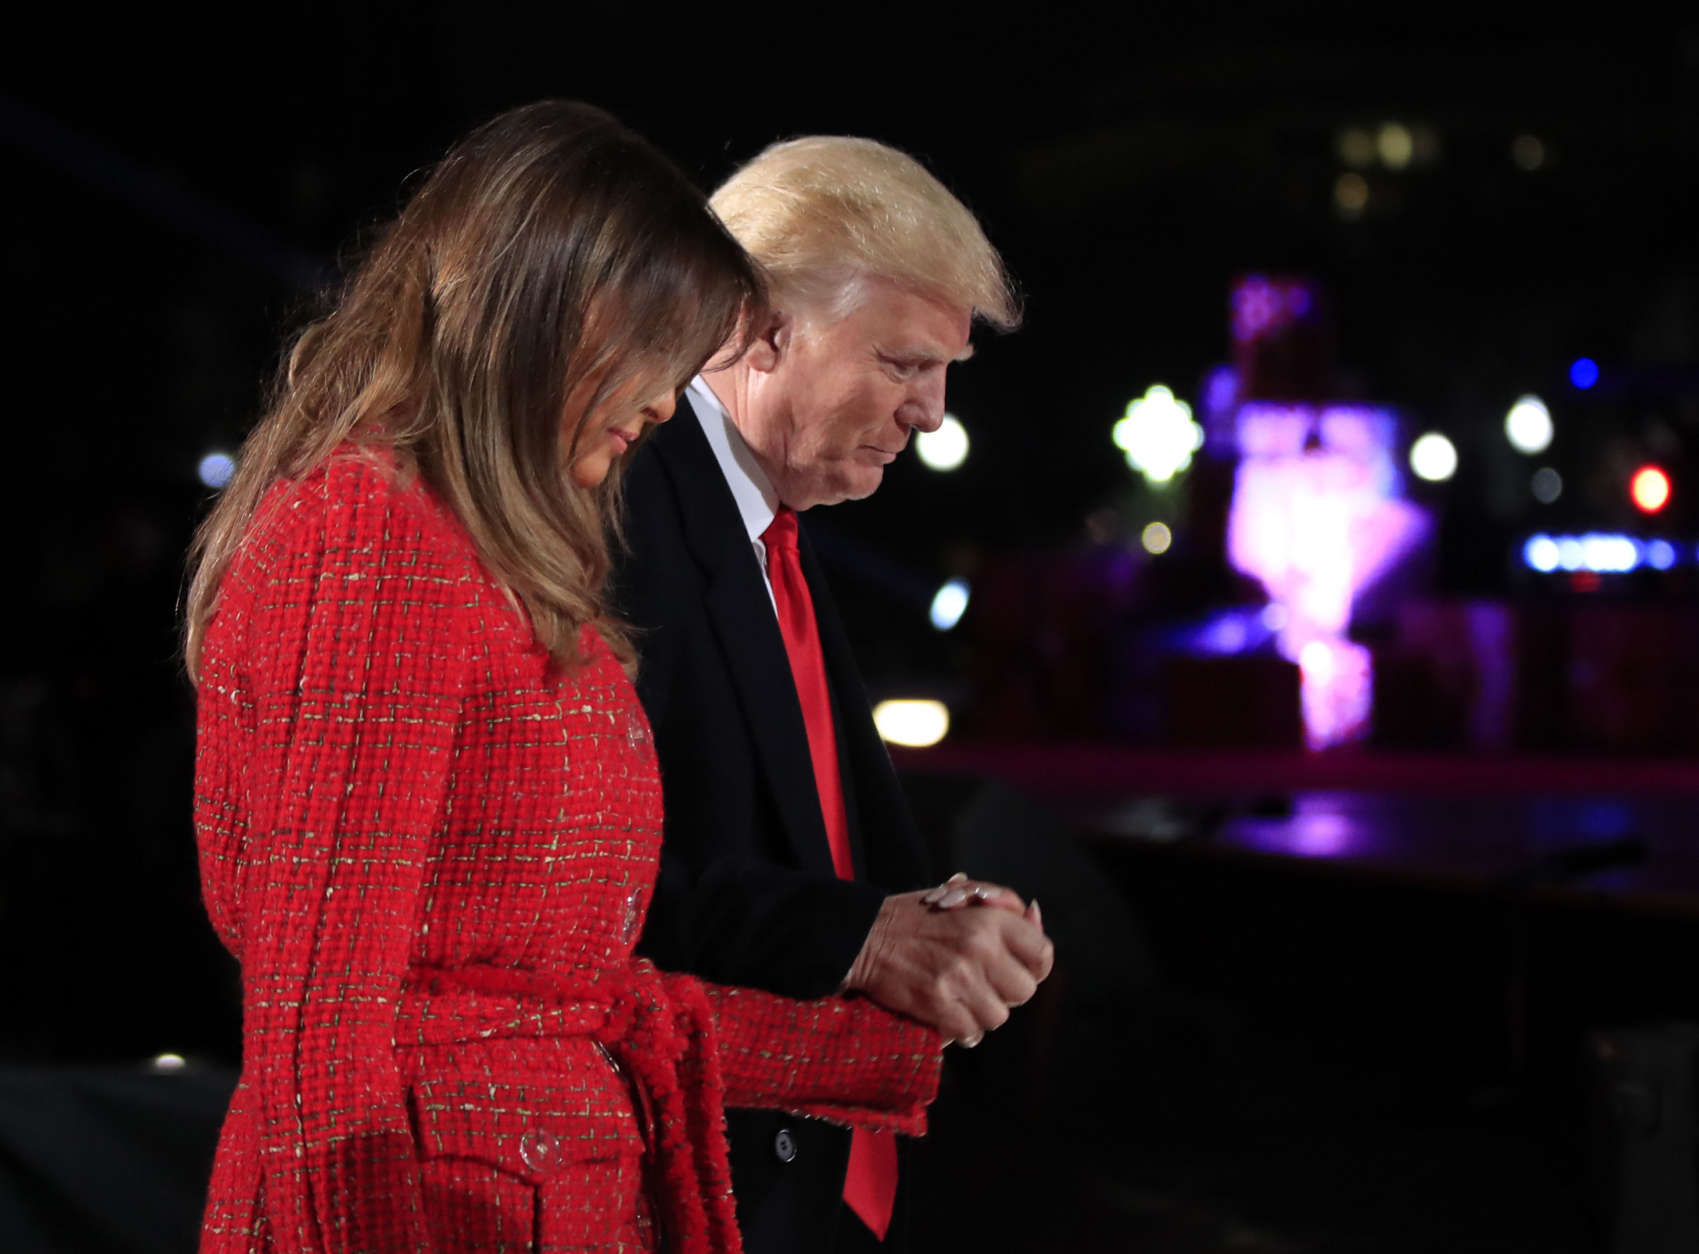 President Donald Trump holds first lady Melania Trump's hand as they walk back to the stage during the lighting ceremony for the 2017 National Christmas Tree on the Ellipse near the White House in Washington, Thursday, Nov. 30, 2017. (AP Photo/Manuel Balce Ceneta)